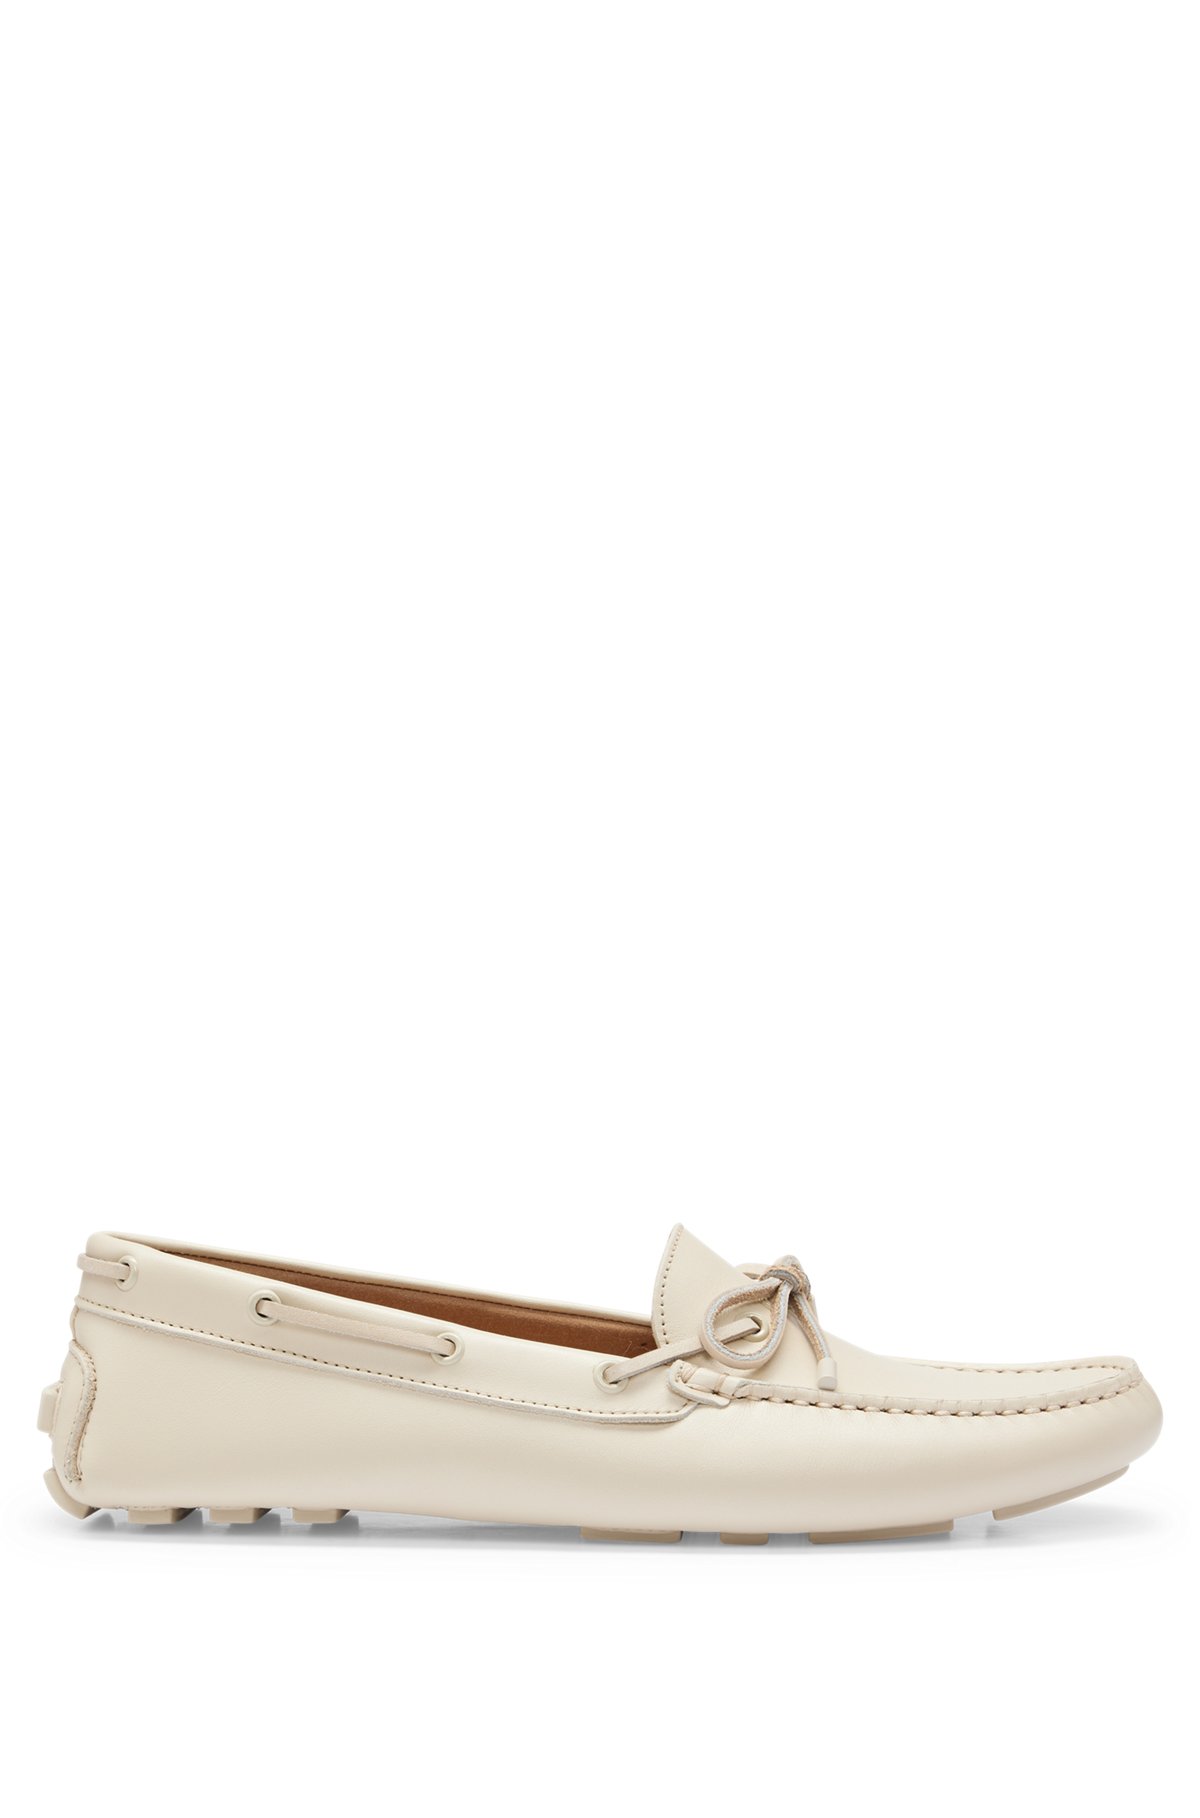 Driver moccasins in leather with bow detail, Light Beige